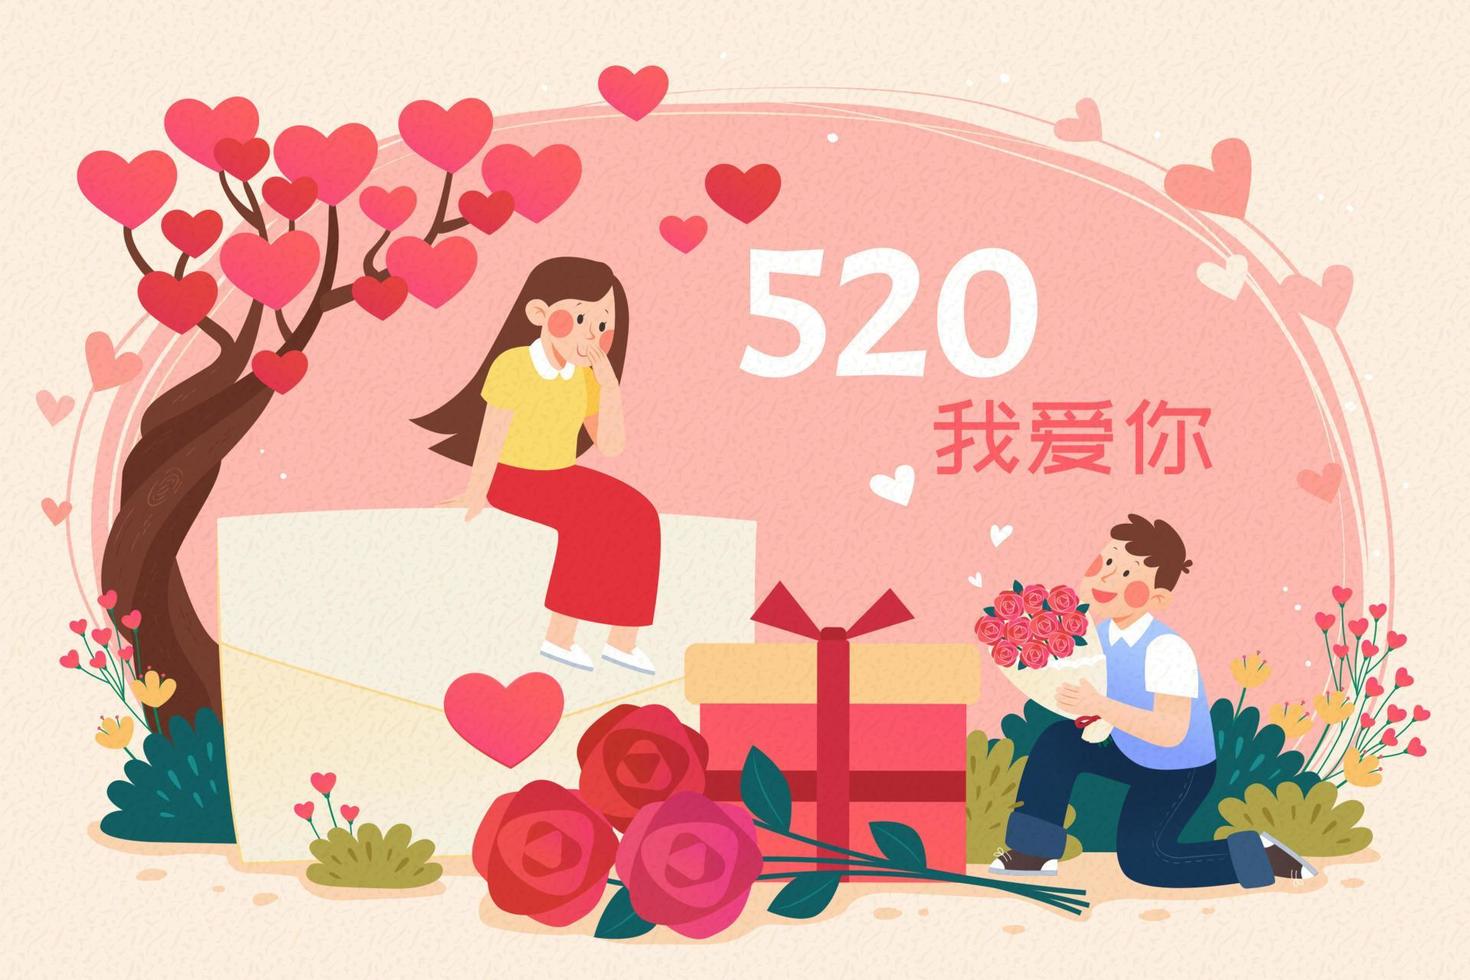 Proposal with roses on Valentine. Illustration of a young man proposing on his knees to his woman with a bouquet of roses, gift and love letter. Chinese translation, I love you vector